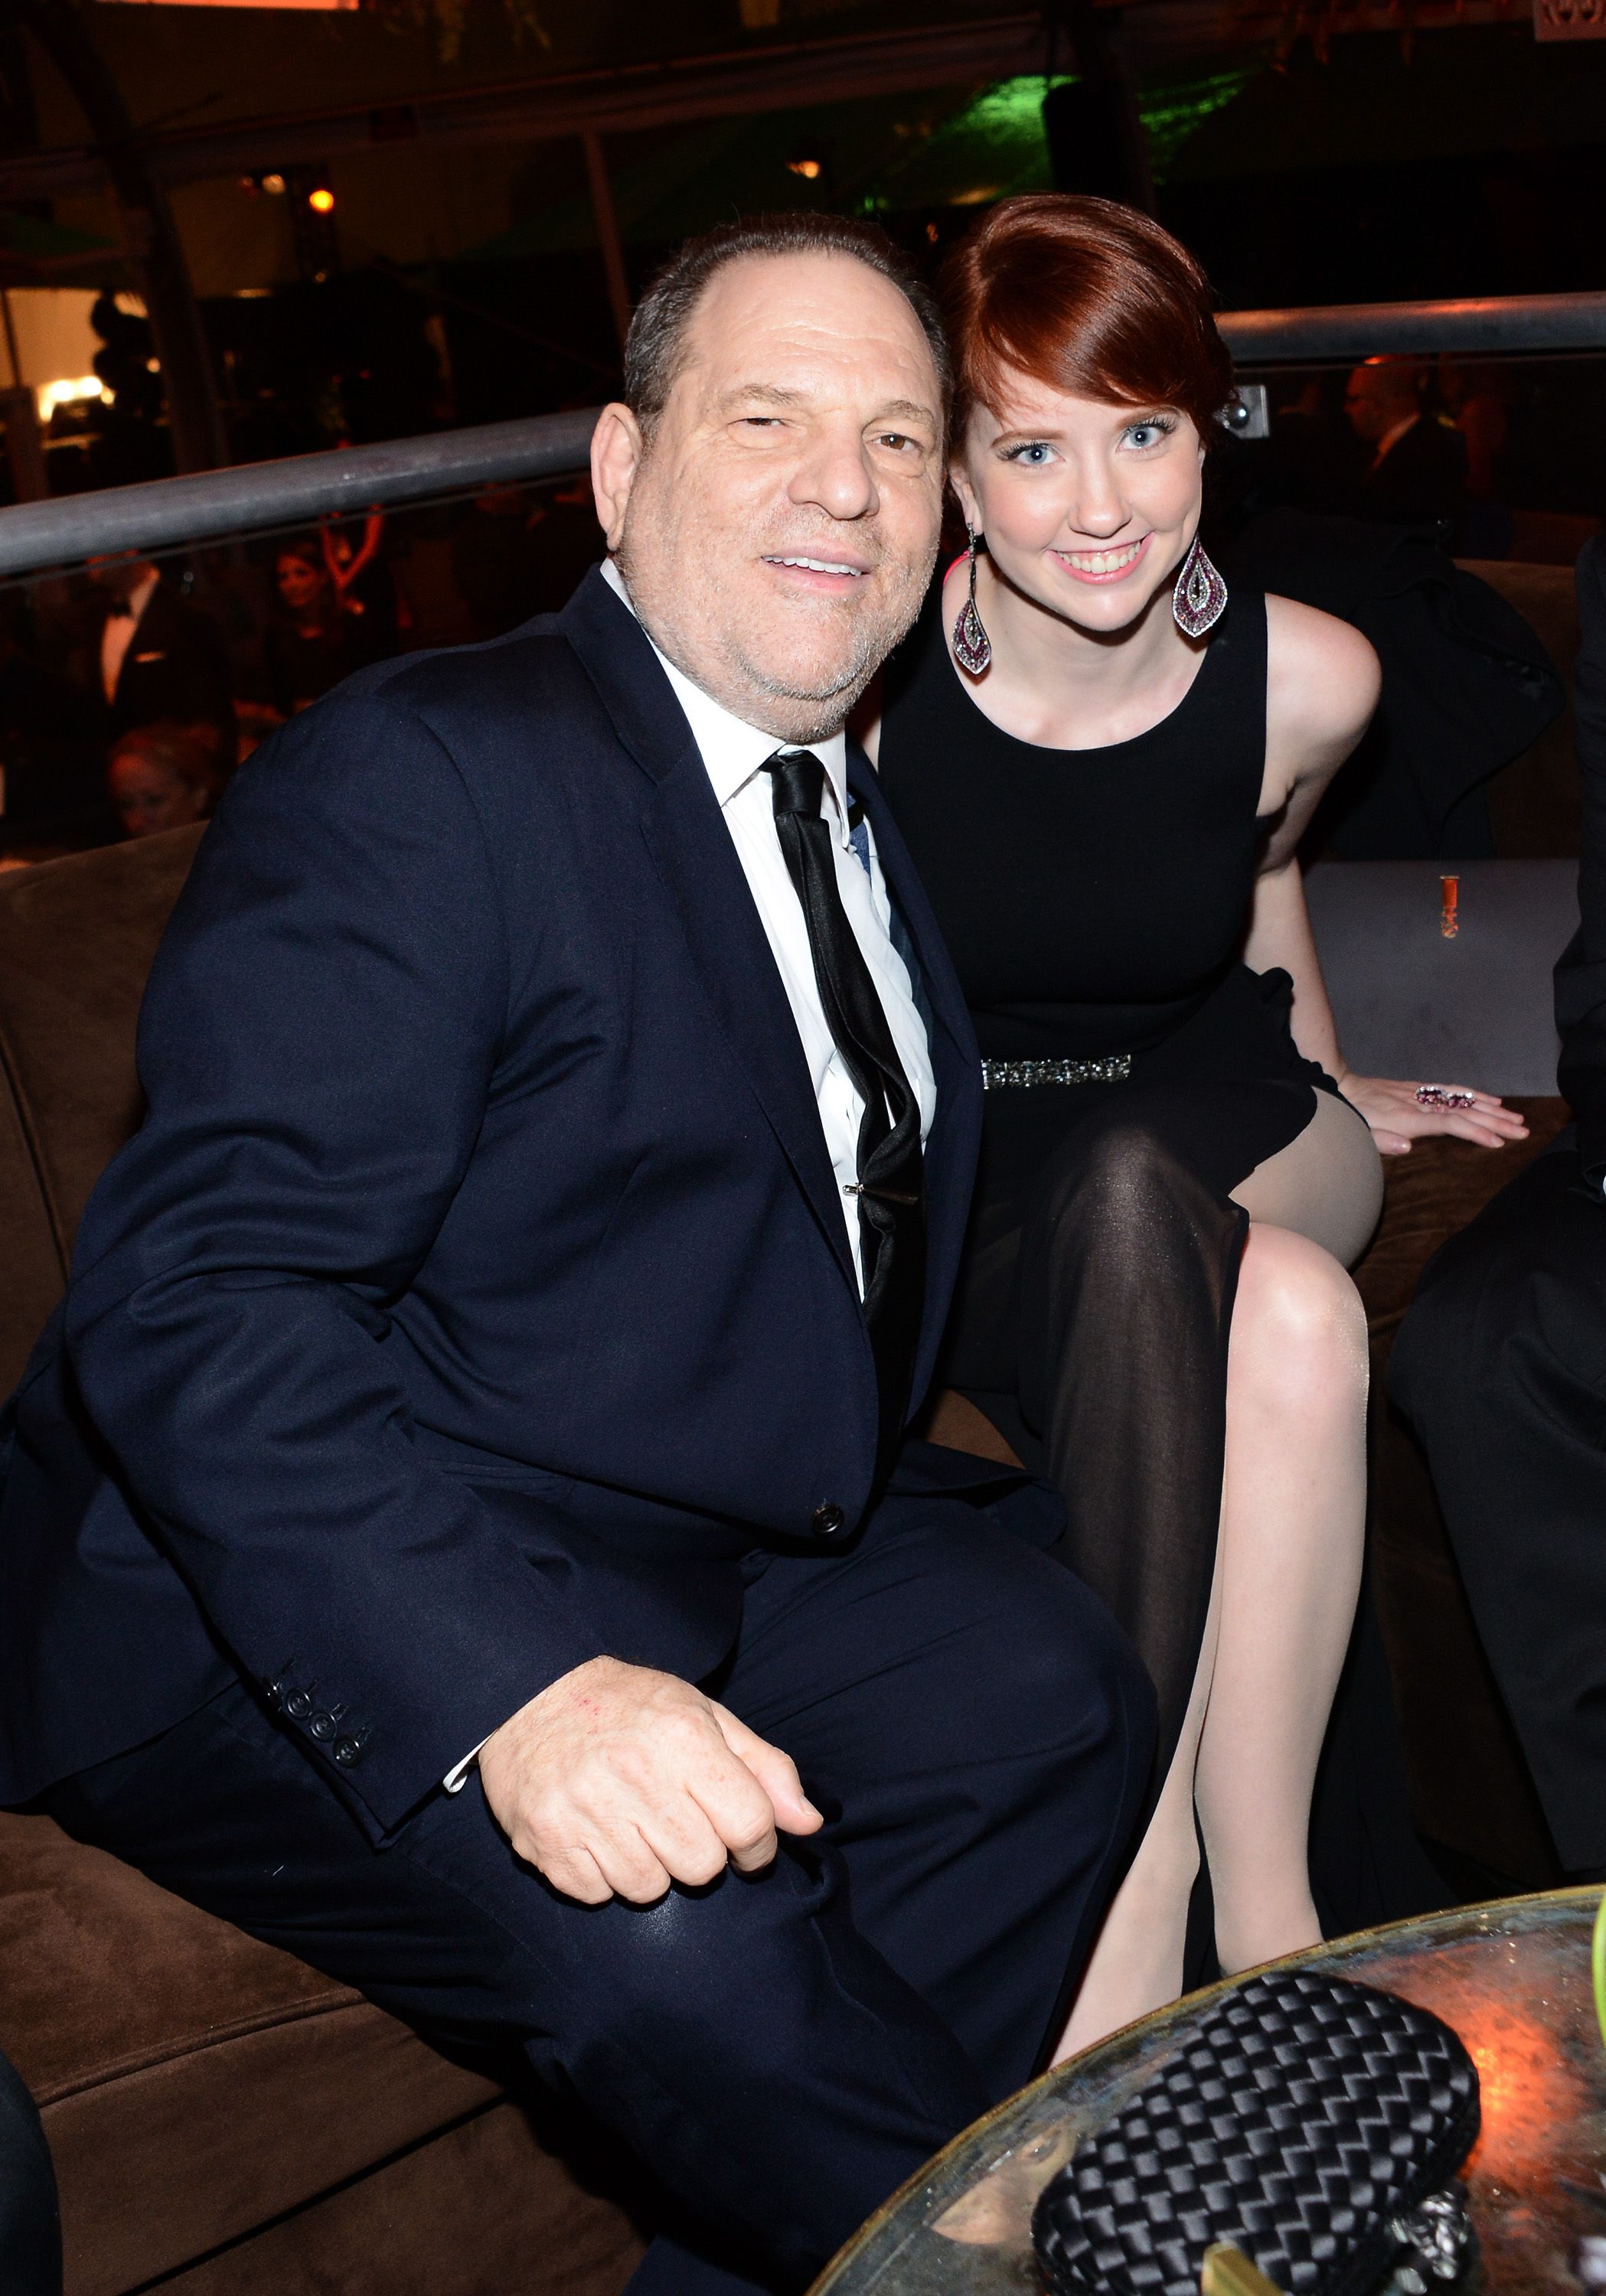 Harvey Weinstein and Lily Weinstein during The Weinstein Company & Netflix's 2014 Golden Globes After Party on January 12, 2014 in Beverly Hills, California. | Source: Getty Images